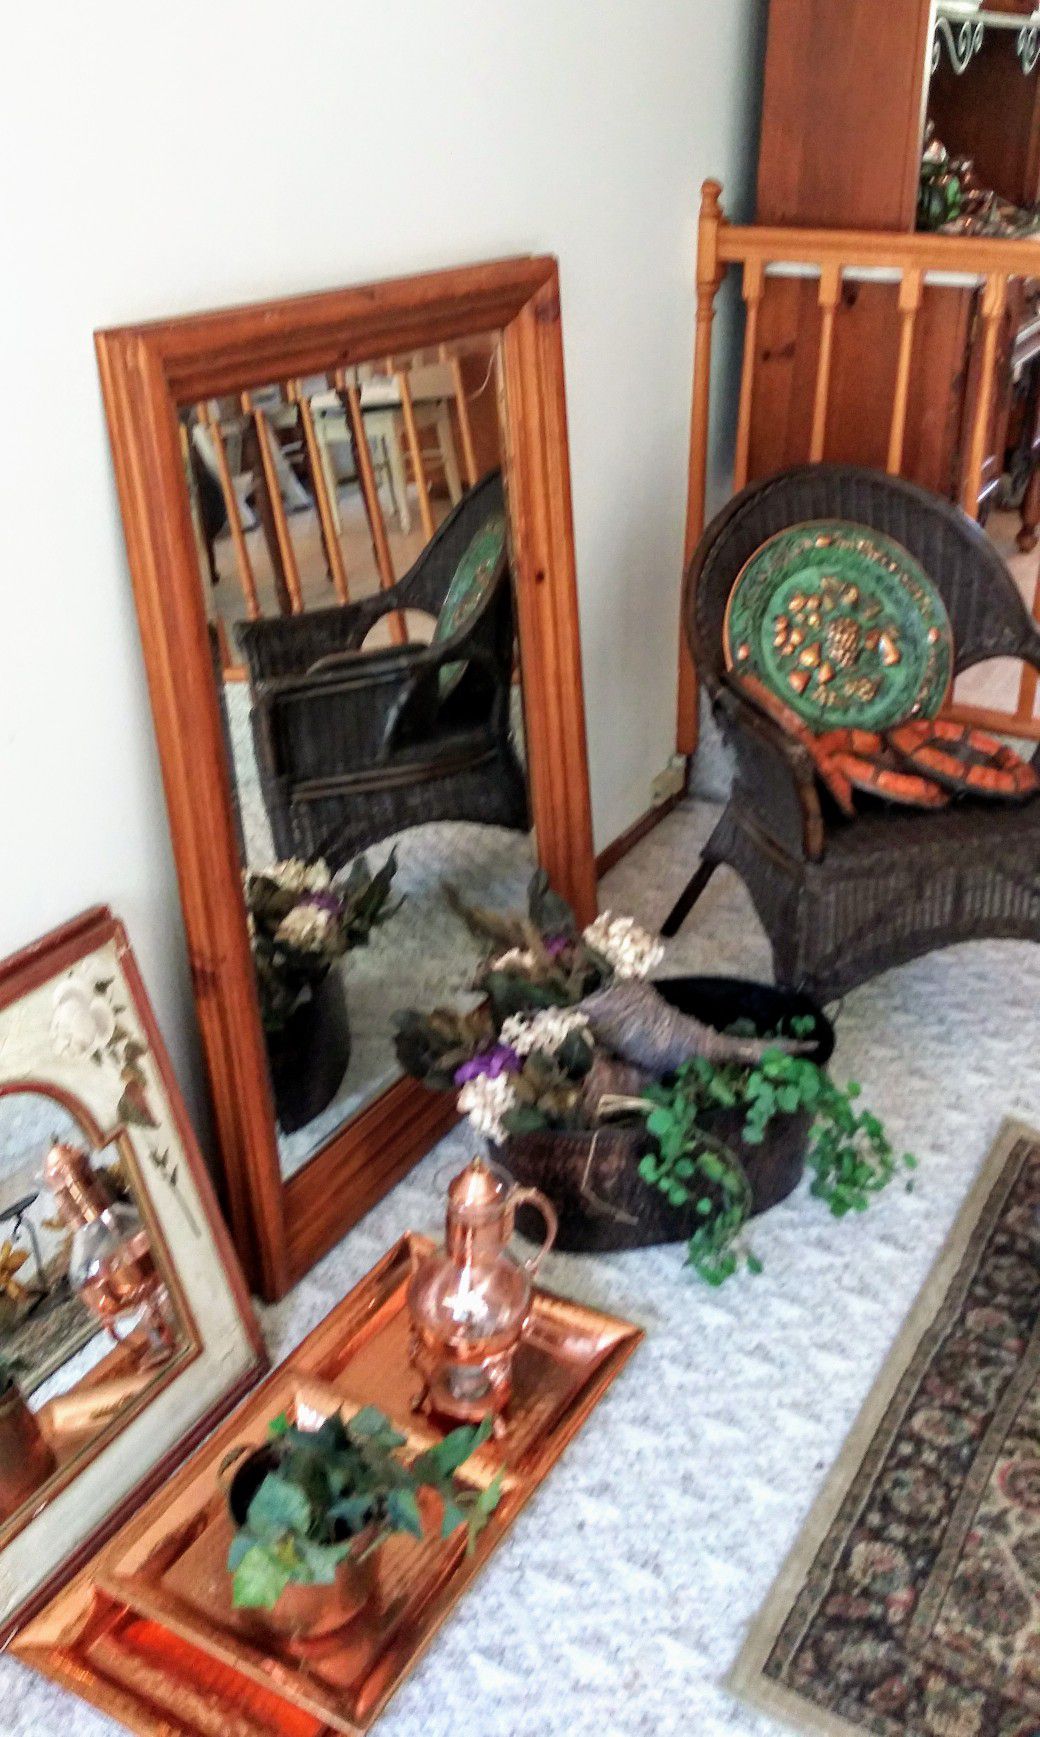 $5&up! Always Avail: Wood, Rattan, Wicker, Orig Art Painting s, Gold & Iron Metal,  Mirror s Decor Frame s, Sets, Tray s Trunk Table Chairs +100s MORE